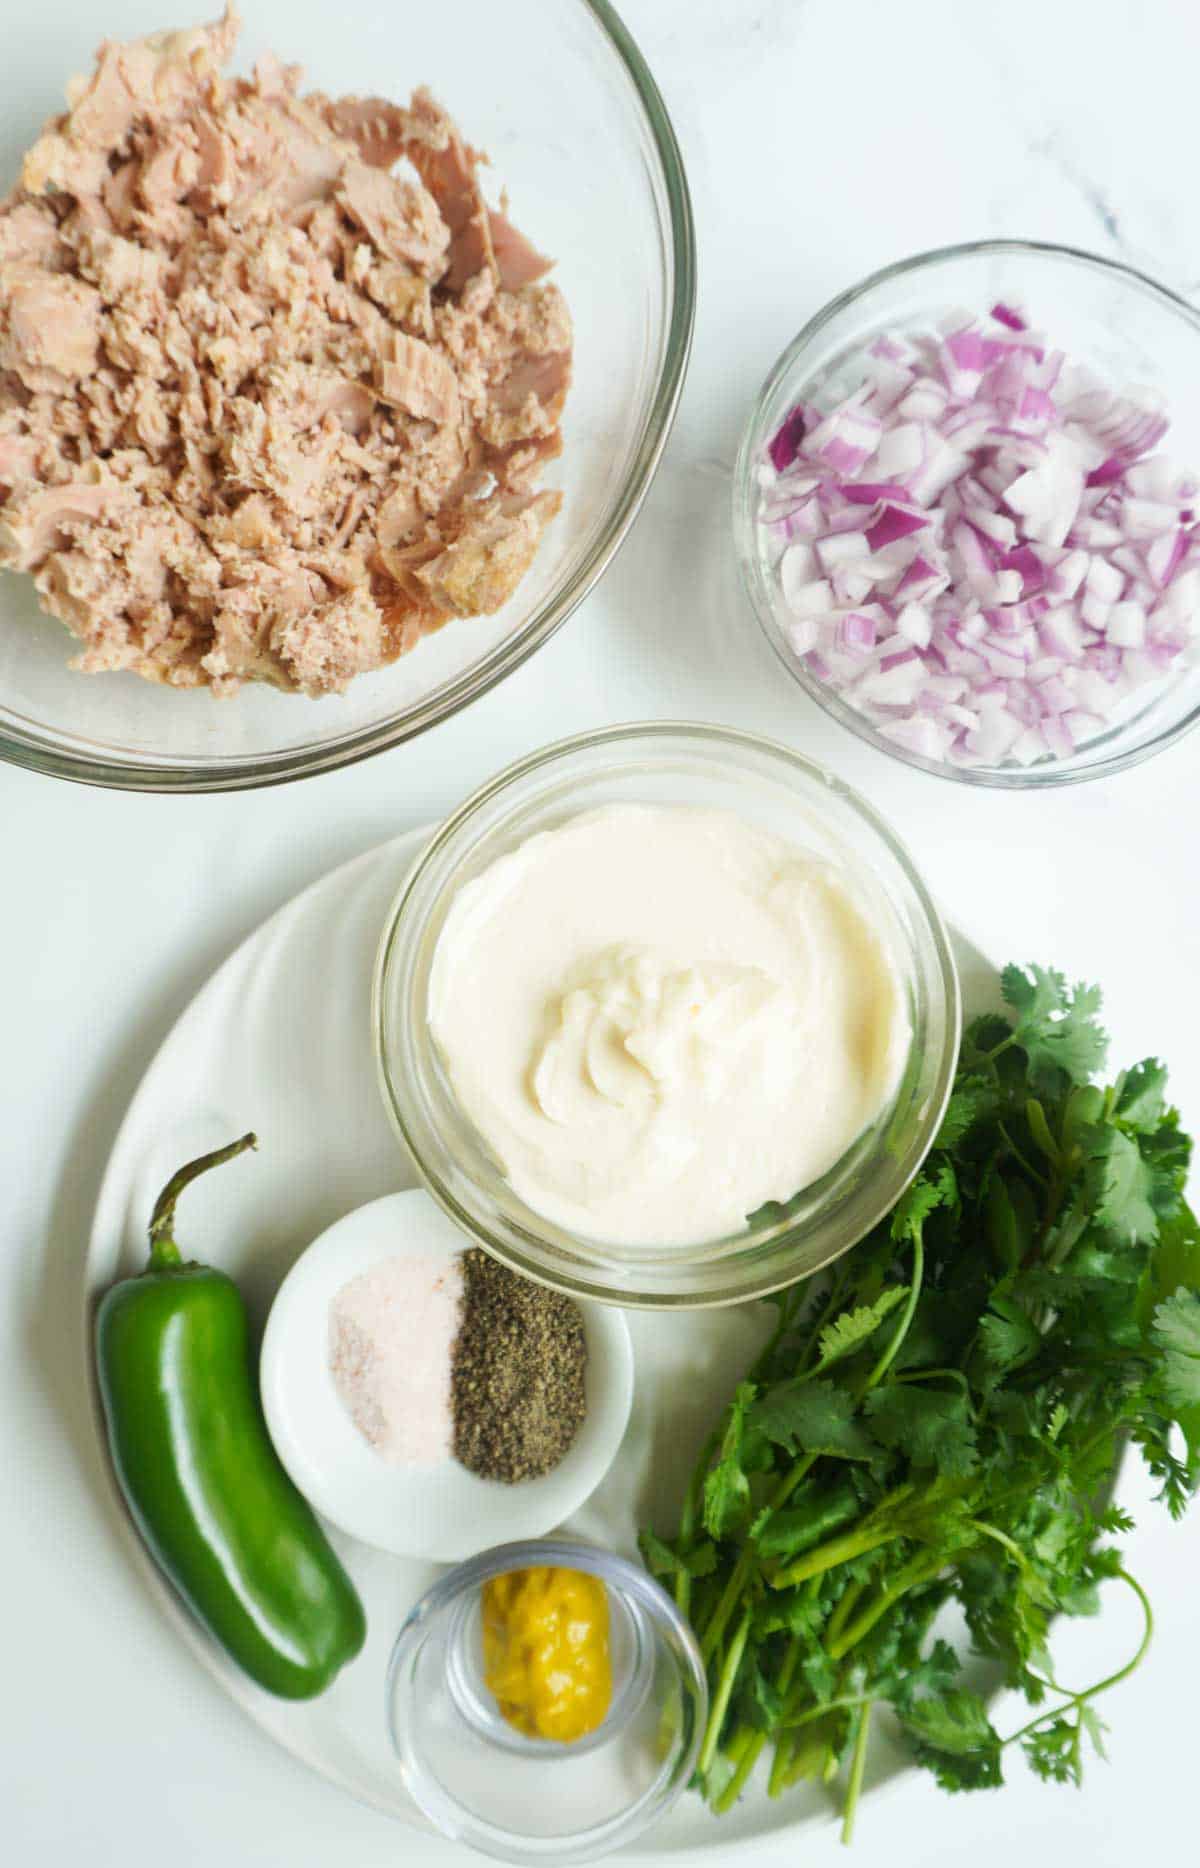 a plate with seasonings and herbs for tuna spread with a bowl of canned tuna and a bowl of chopped red onion to the side